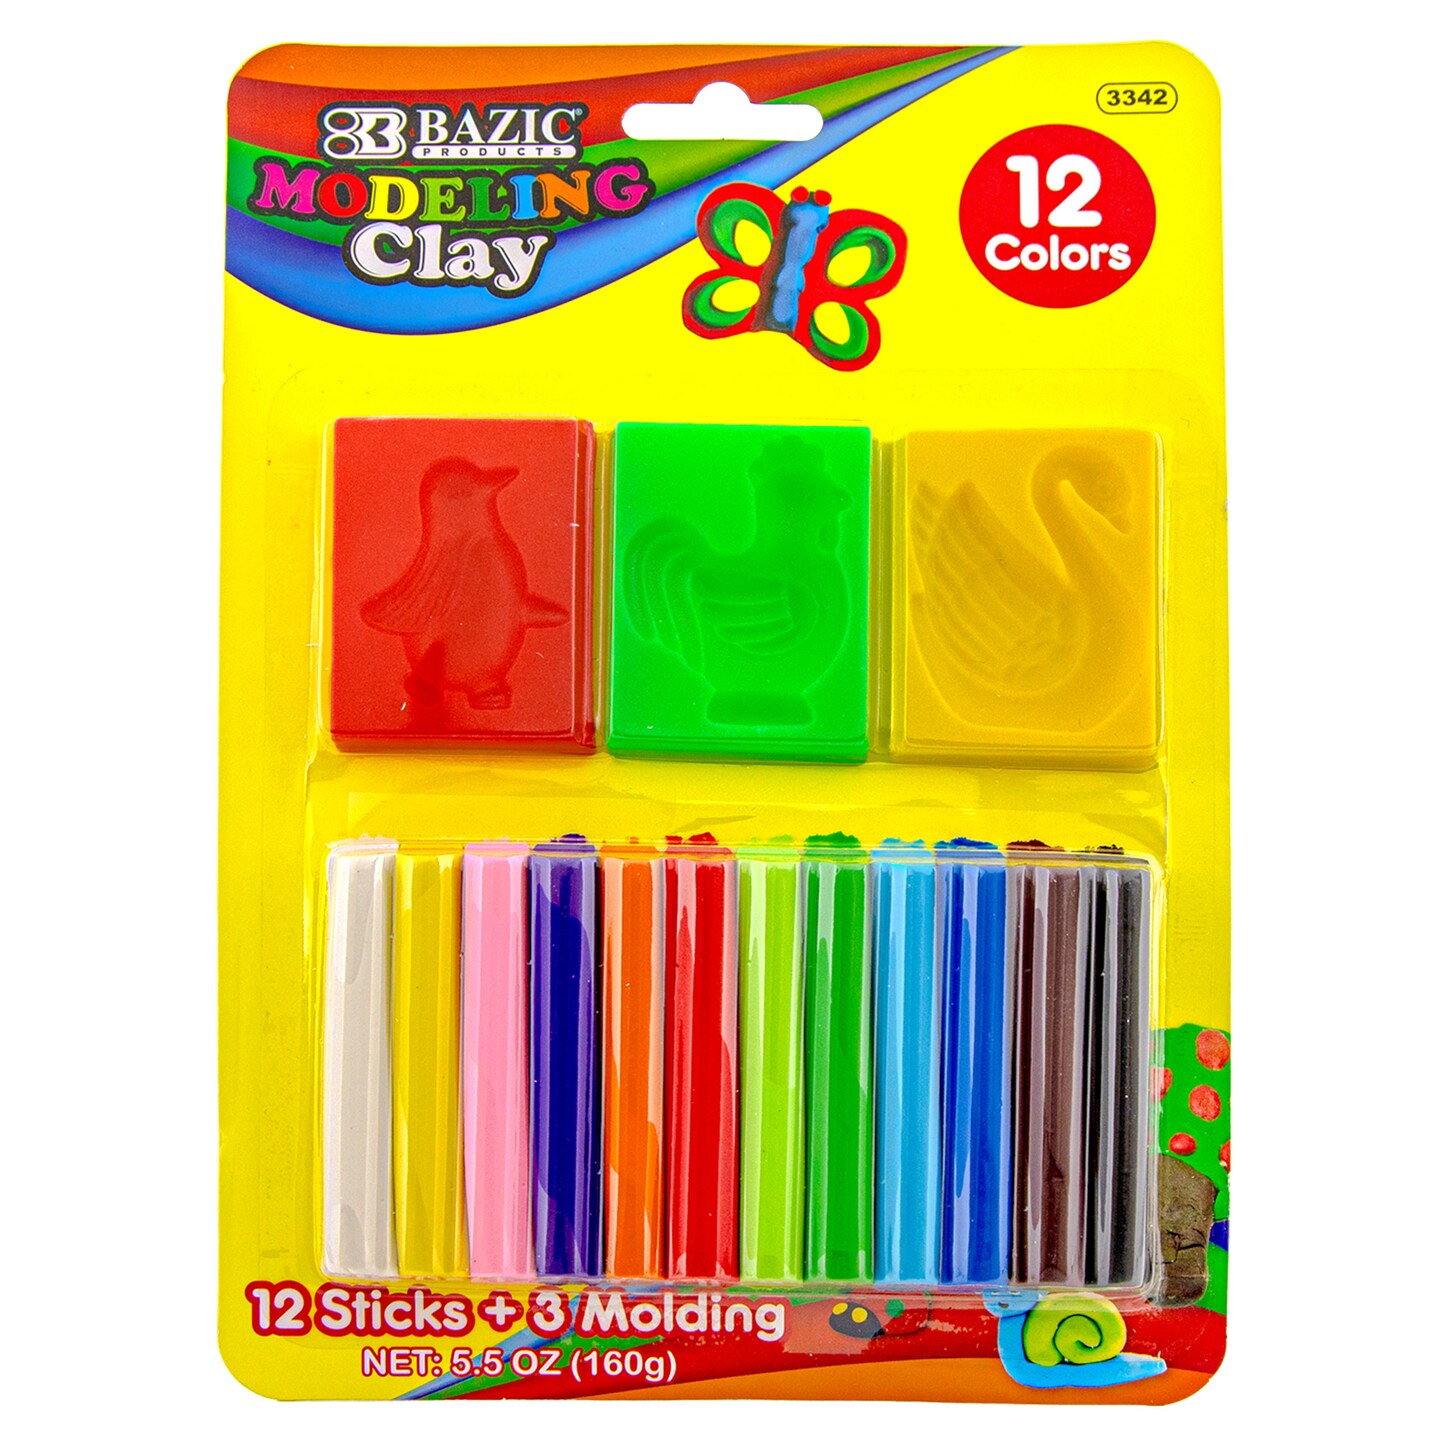 BAZIC Modeling Clay Sticks 12 Color 160g w/ 3 Molding Tray